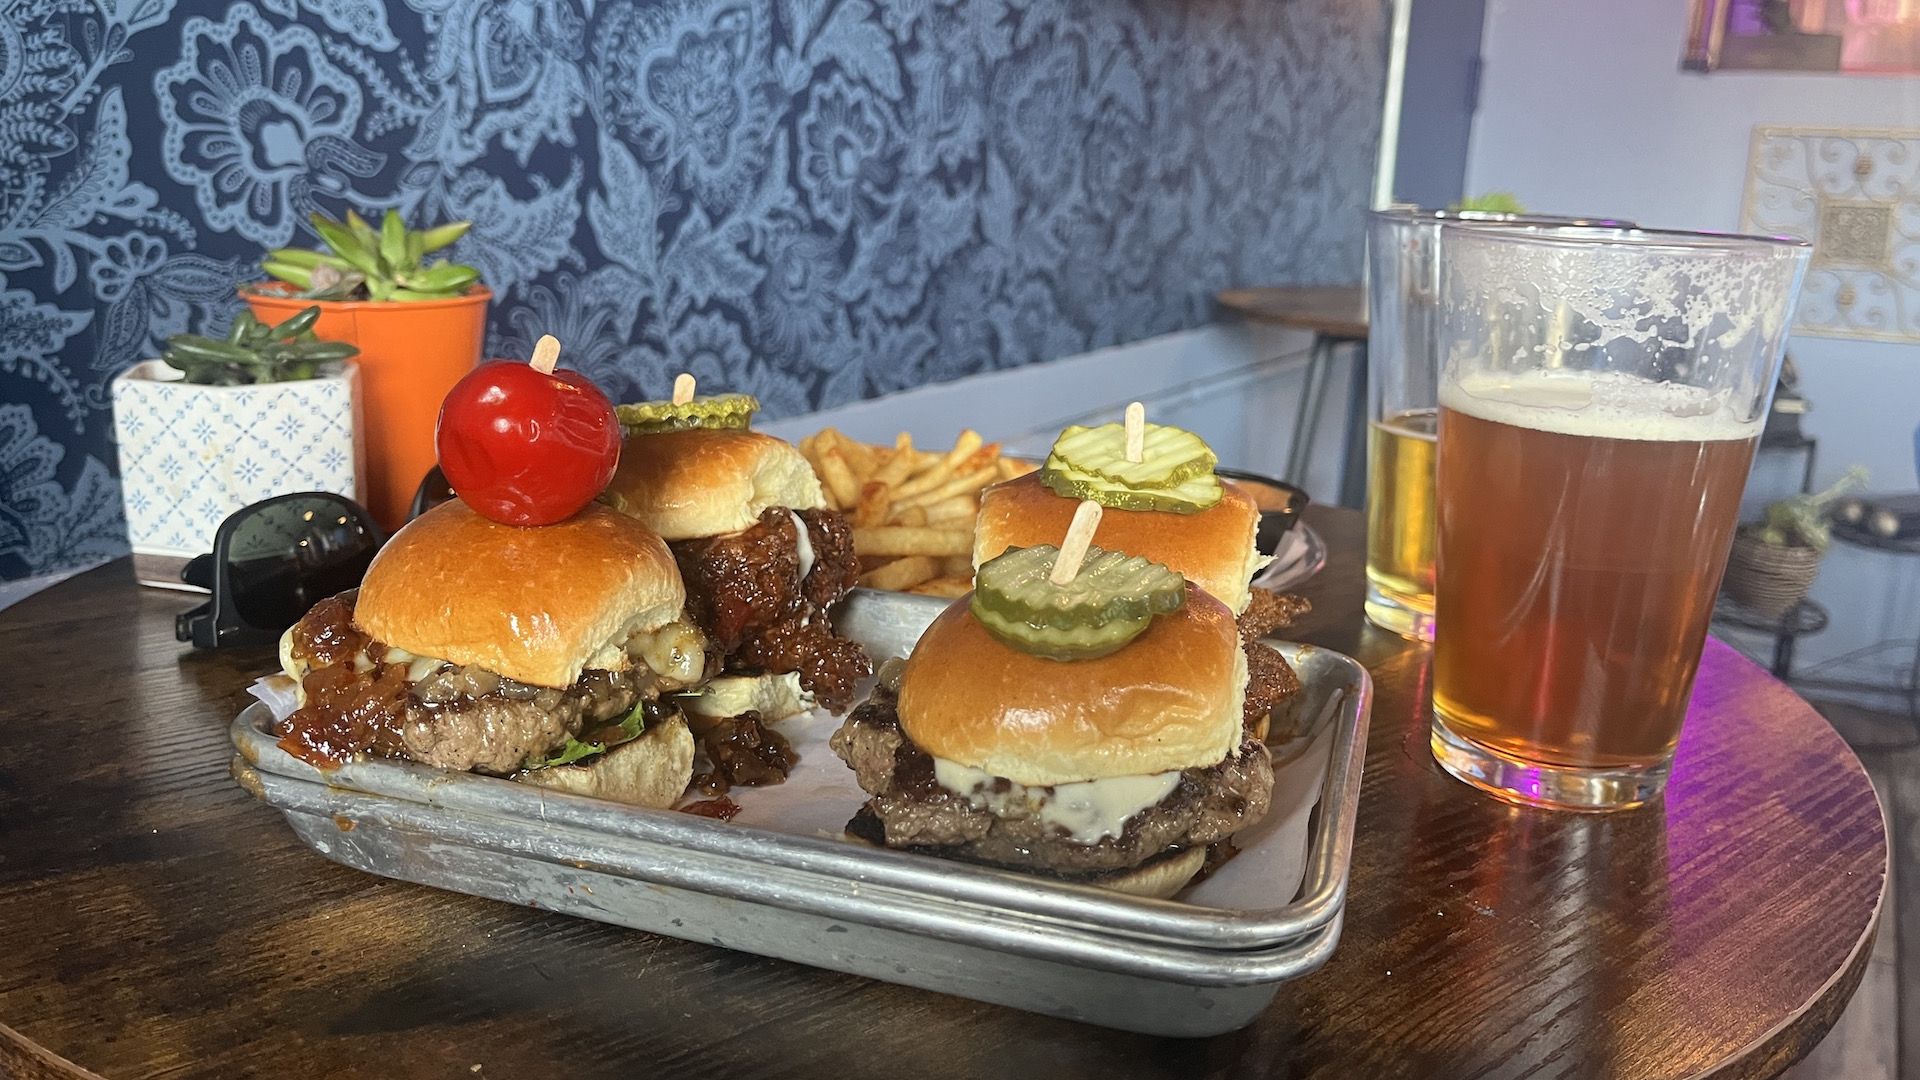 Four burger sliders on a tray with a beer.